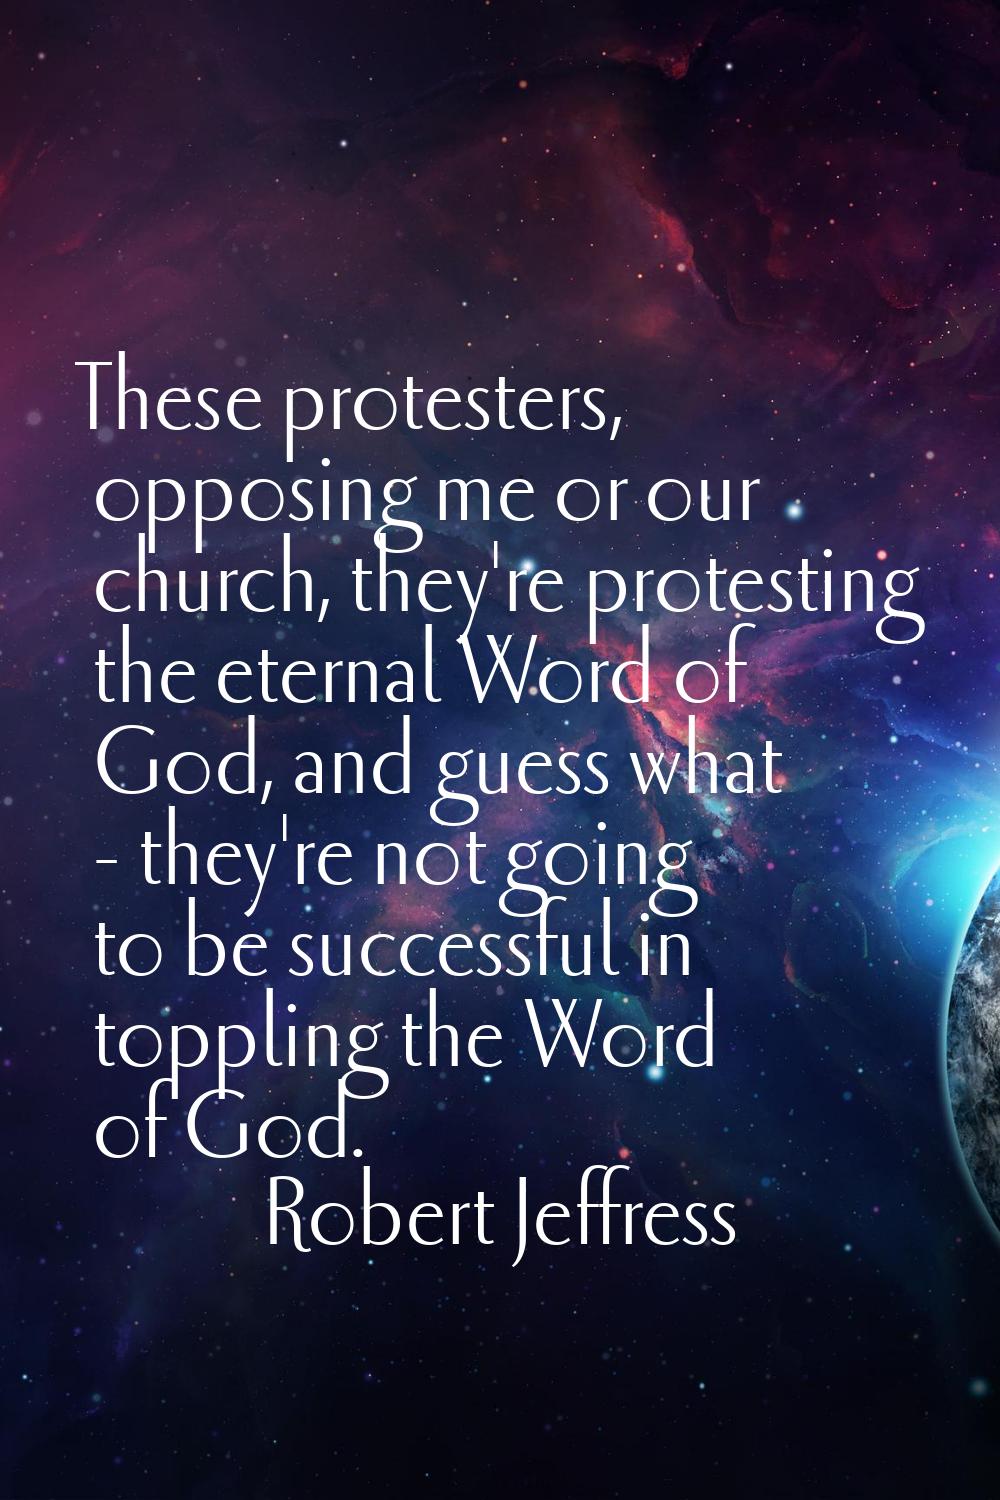 These protesters, opposing me or our church, they're protesting the eternal Word of God, and guess 